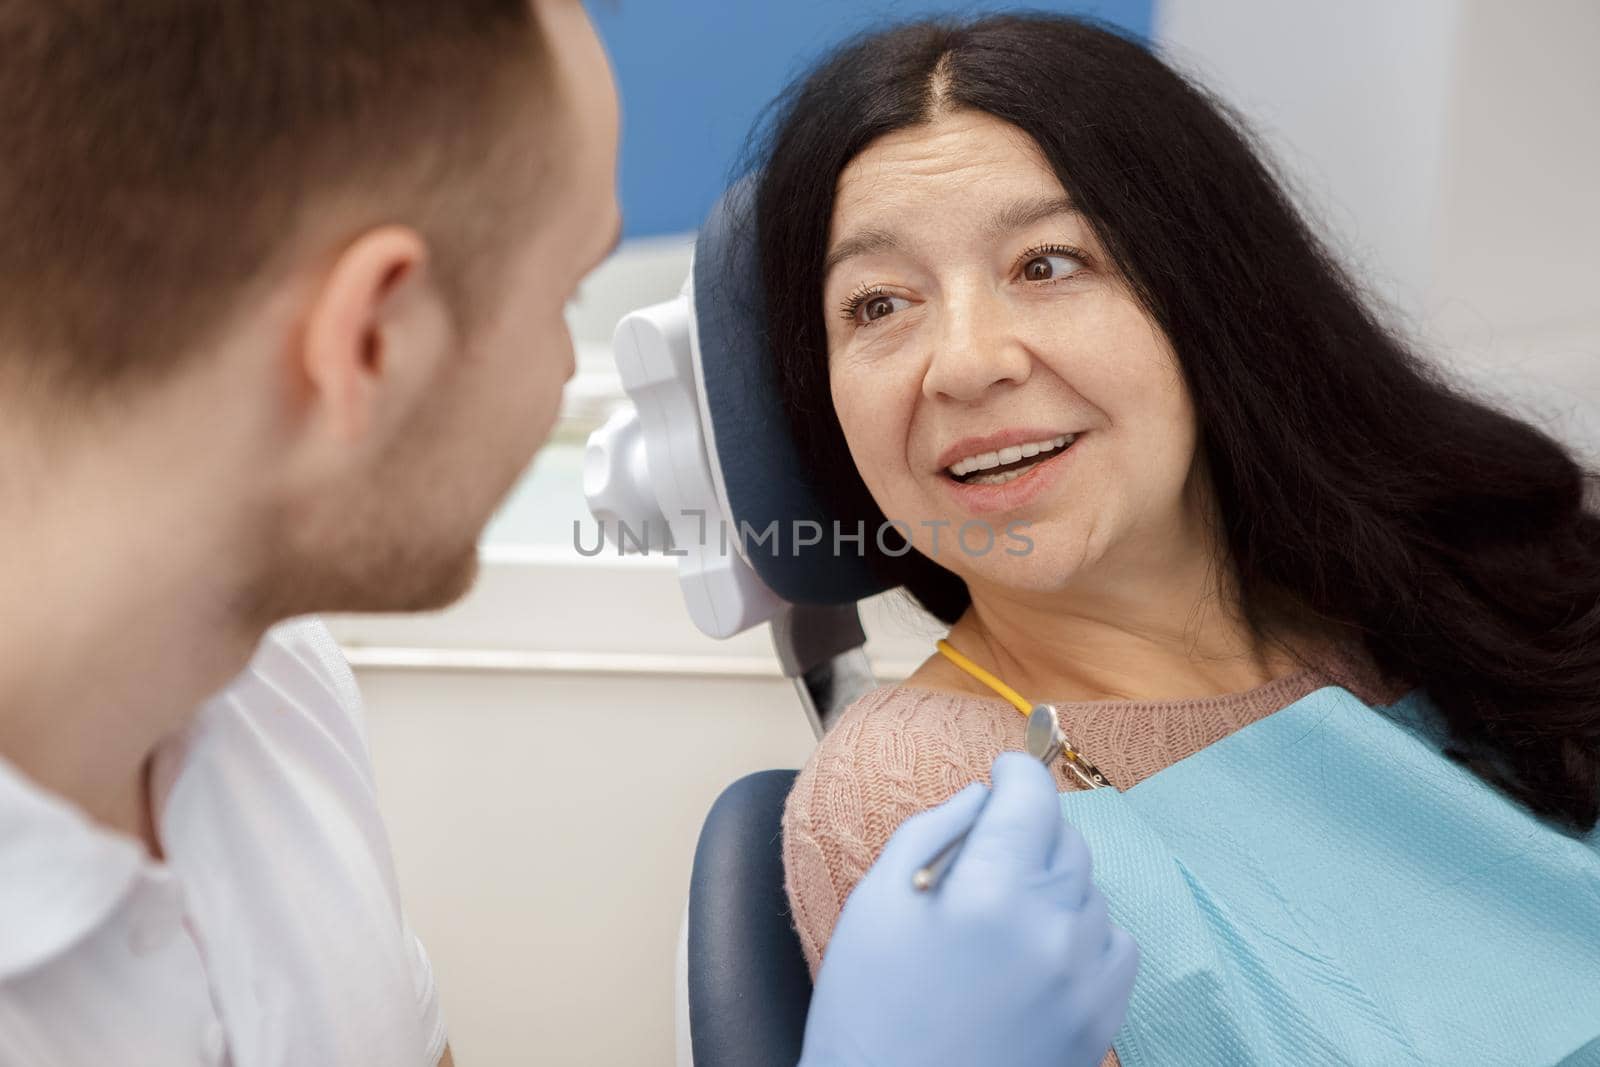 Getting his advice. Senior female patient talking to her dentist at the dental clinic checkup examination healthcare helpful help questions consultation medicine professionalism support client concept